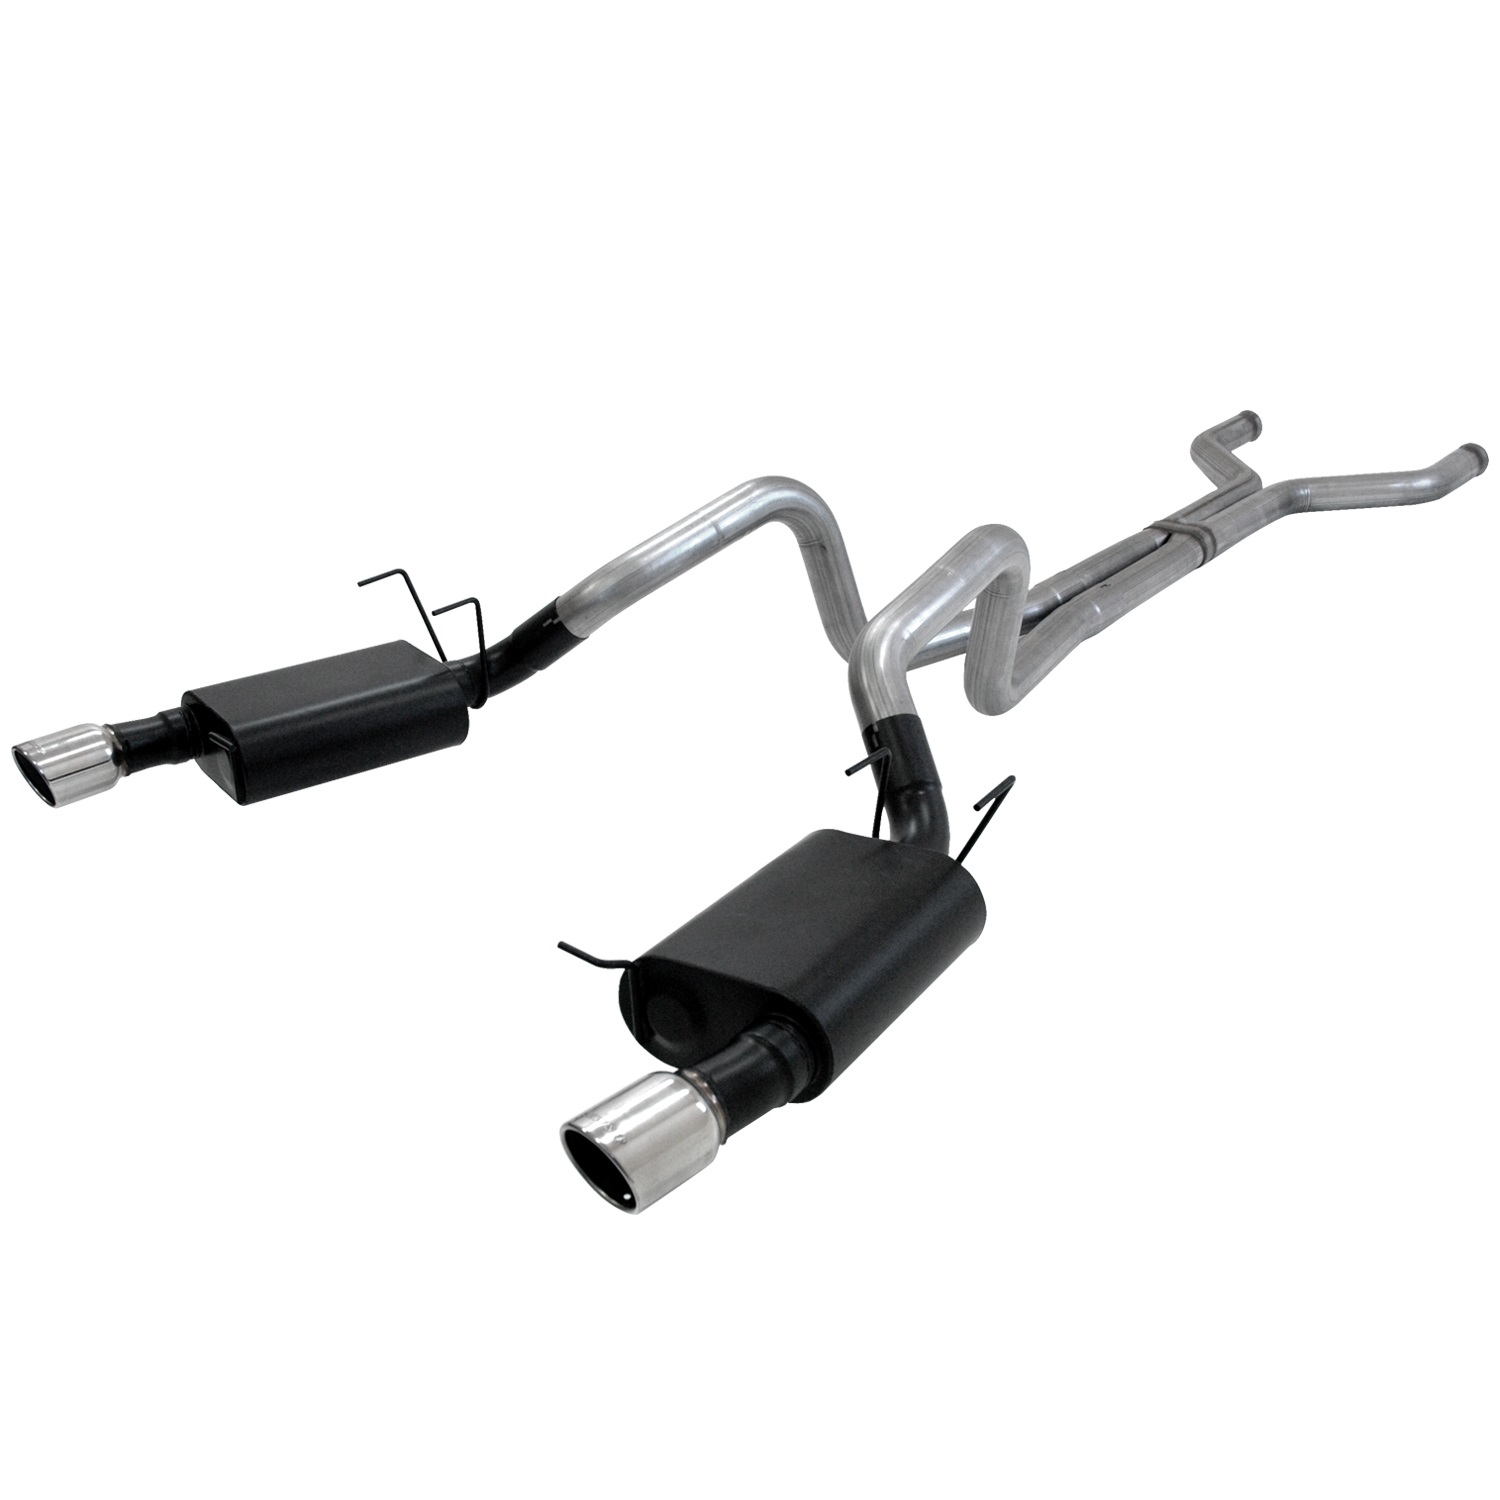 Flowmaster Flowmaster 817500 American Thunder Cat Back Exhaust System Fits 11-12 Mustang